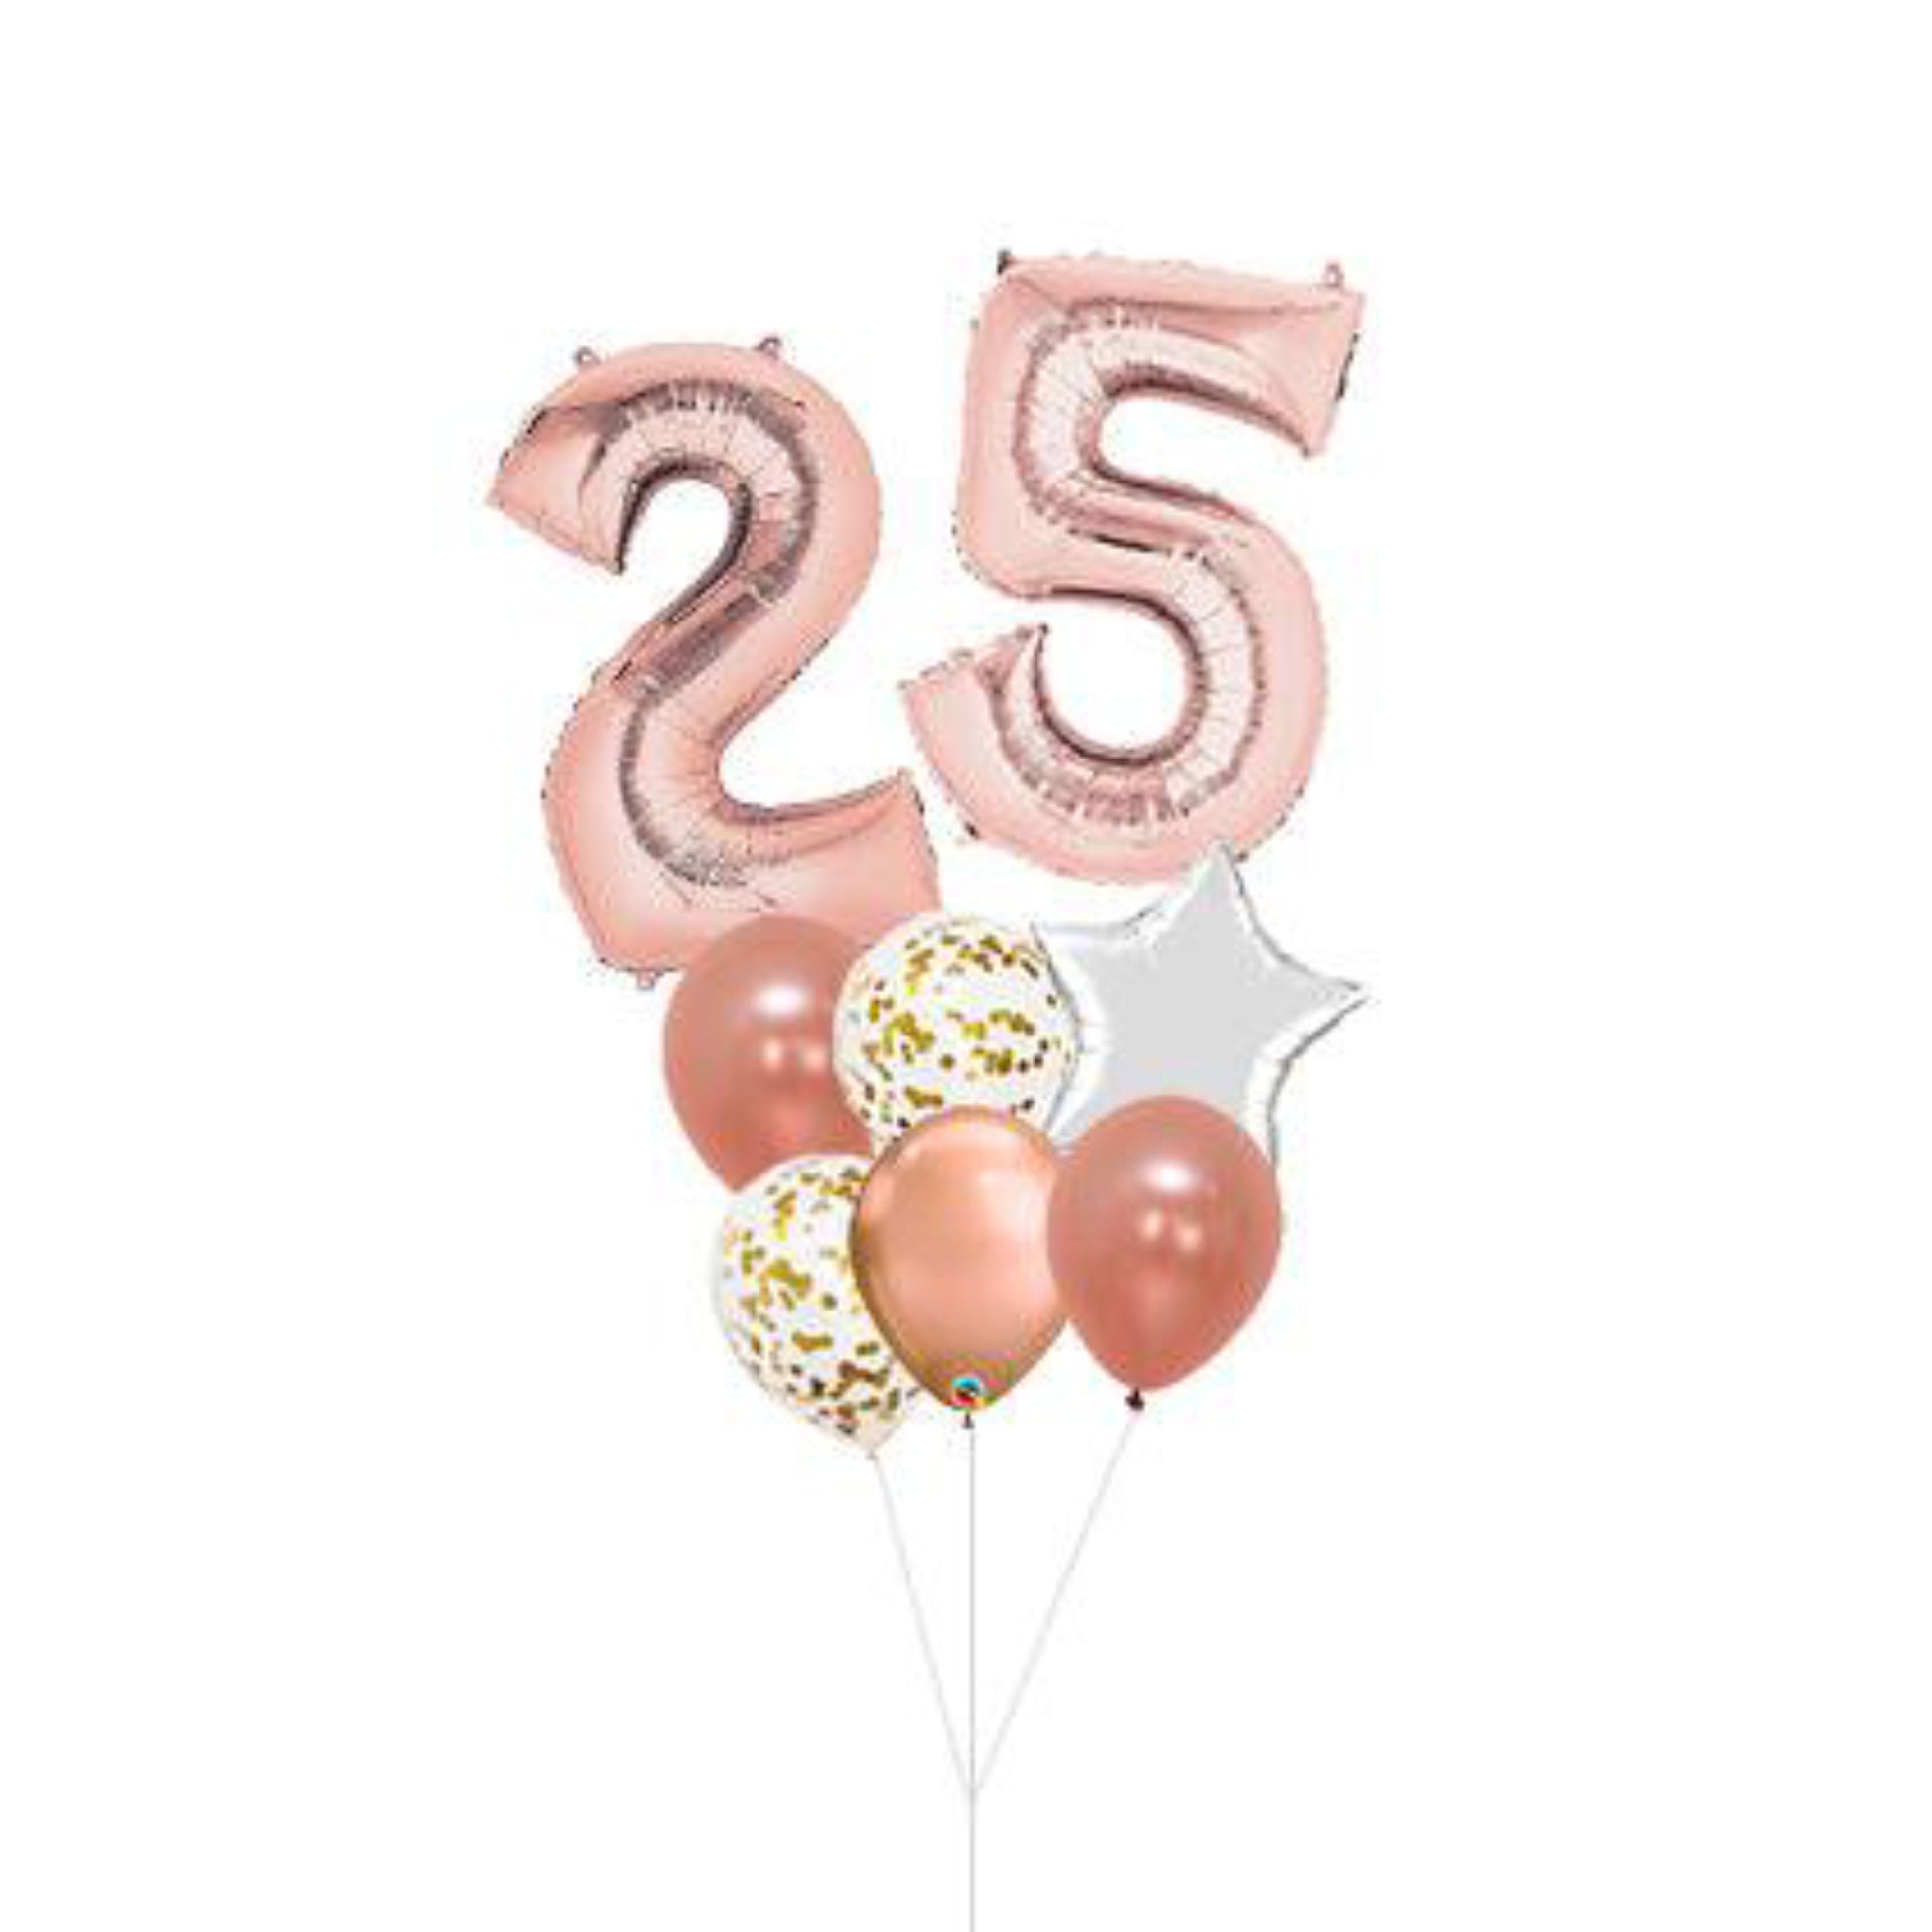 Vancouver Surrey Richmond Helium filled foil number balloon rose gold and latex balloons